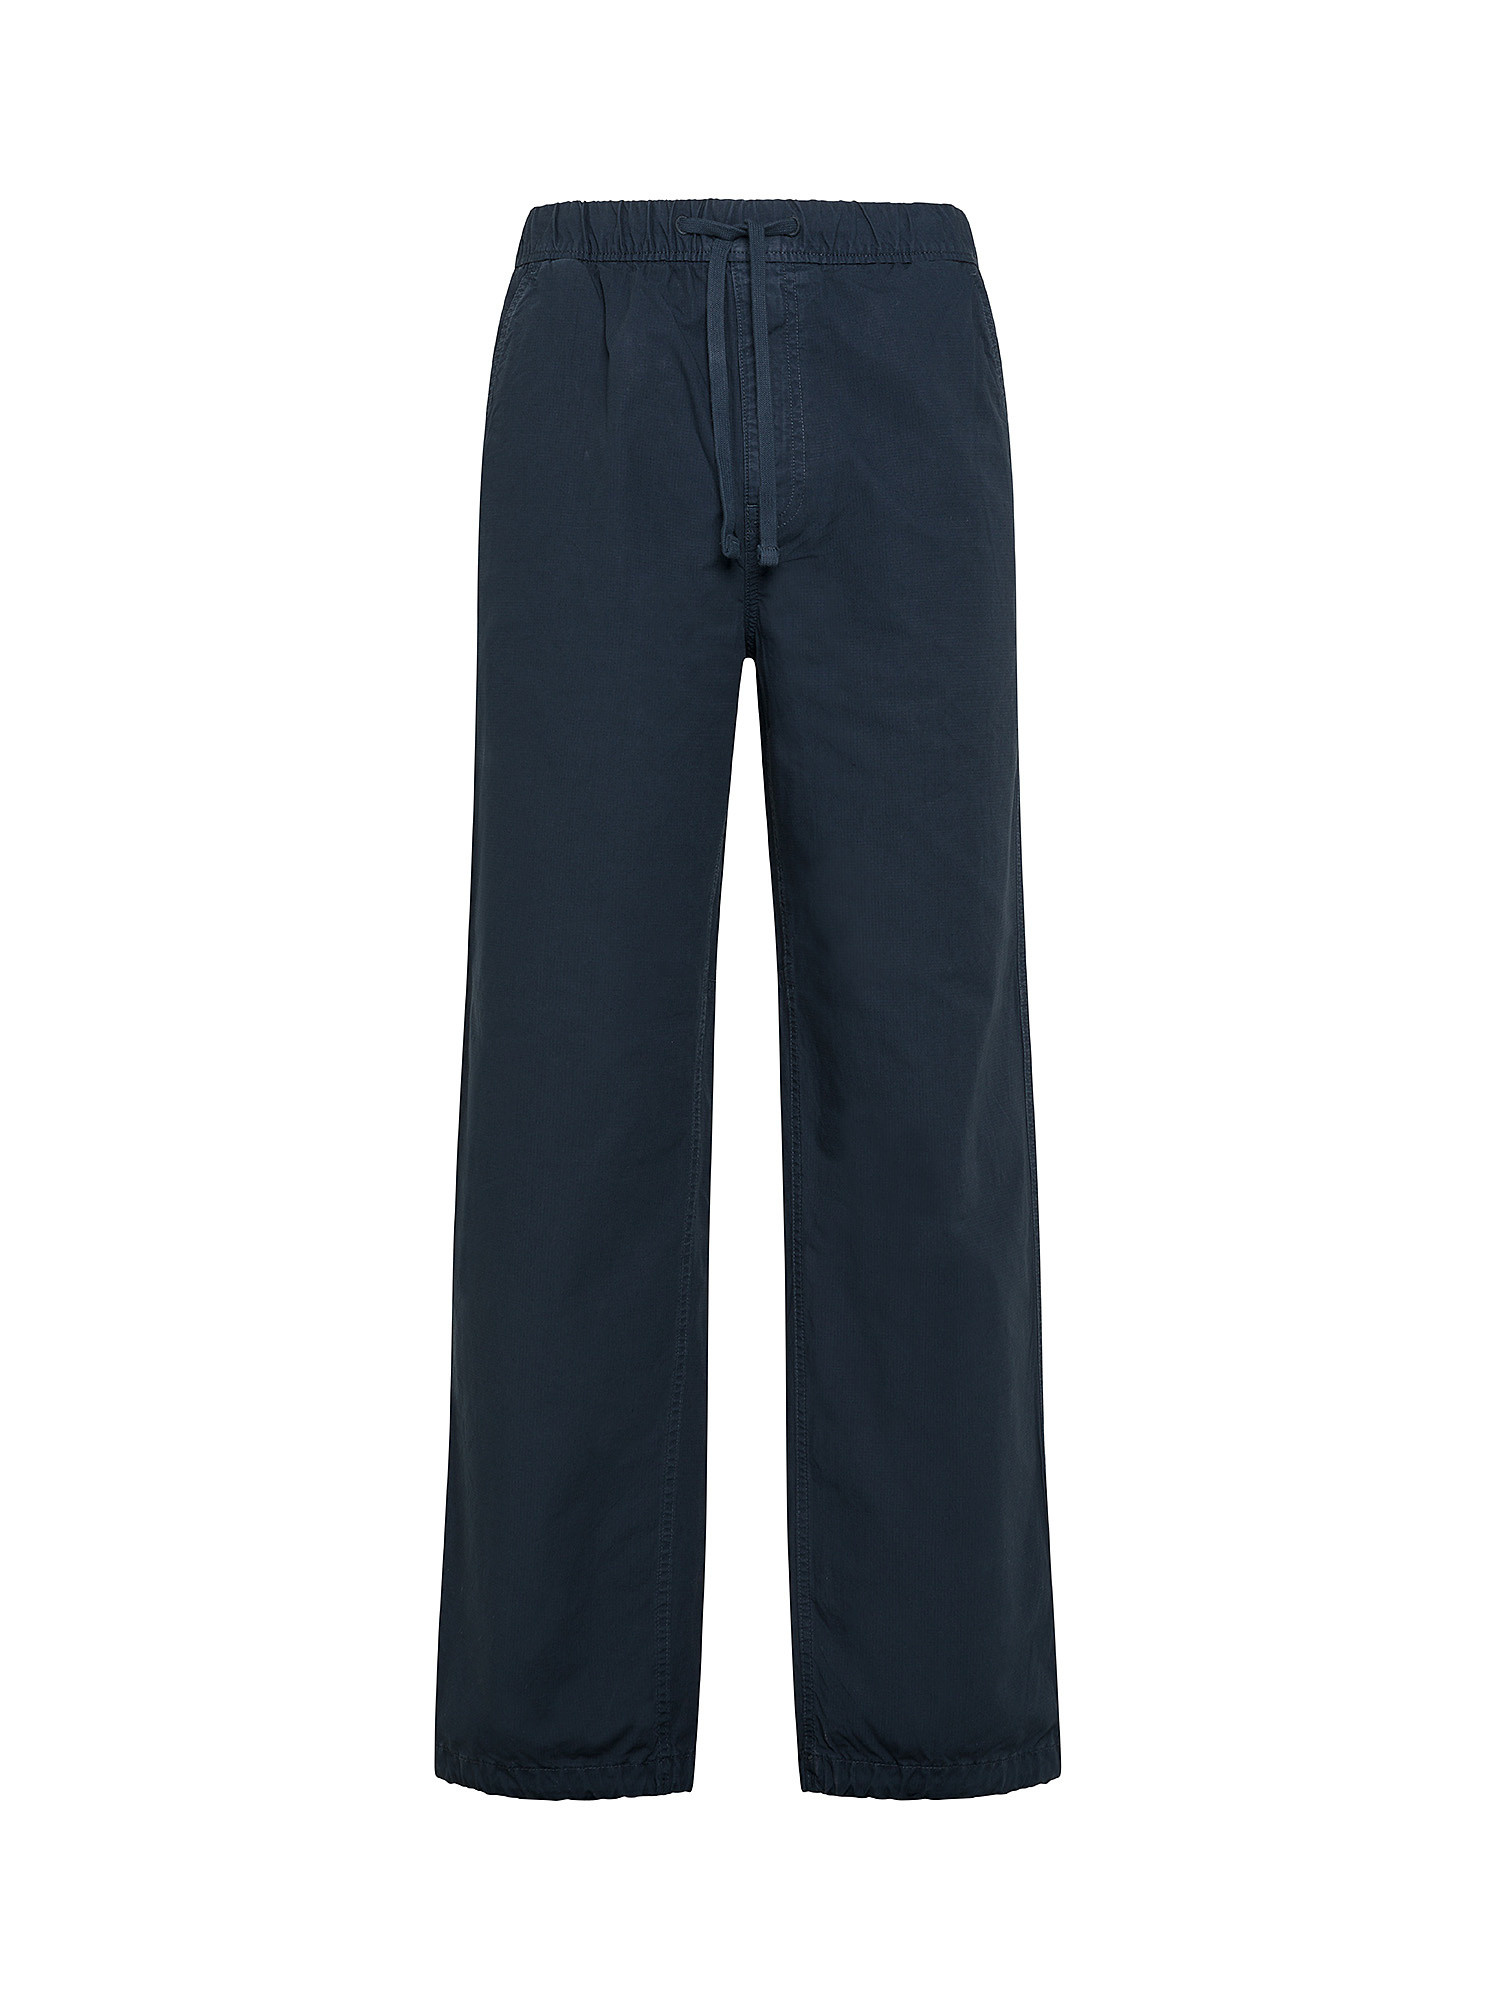 Superdry Cotton Canvas Trousers, Blue, large image number 0